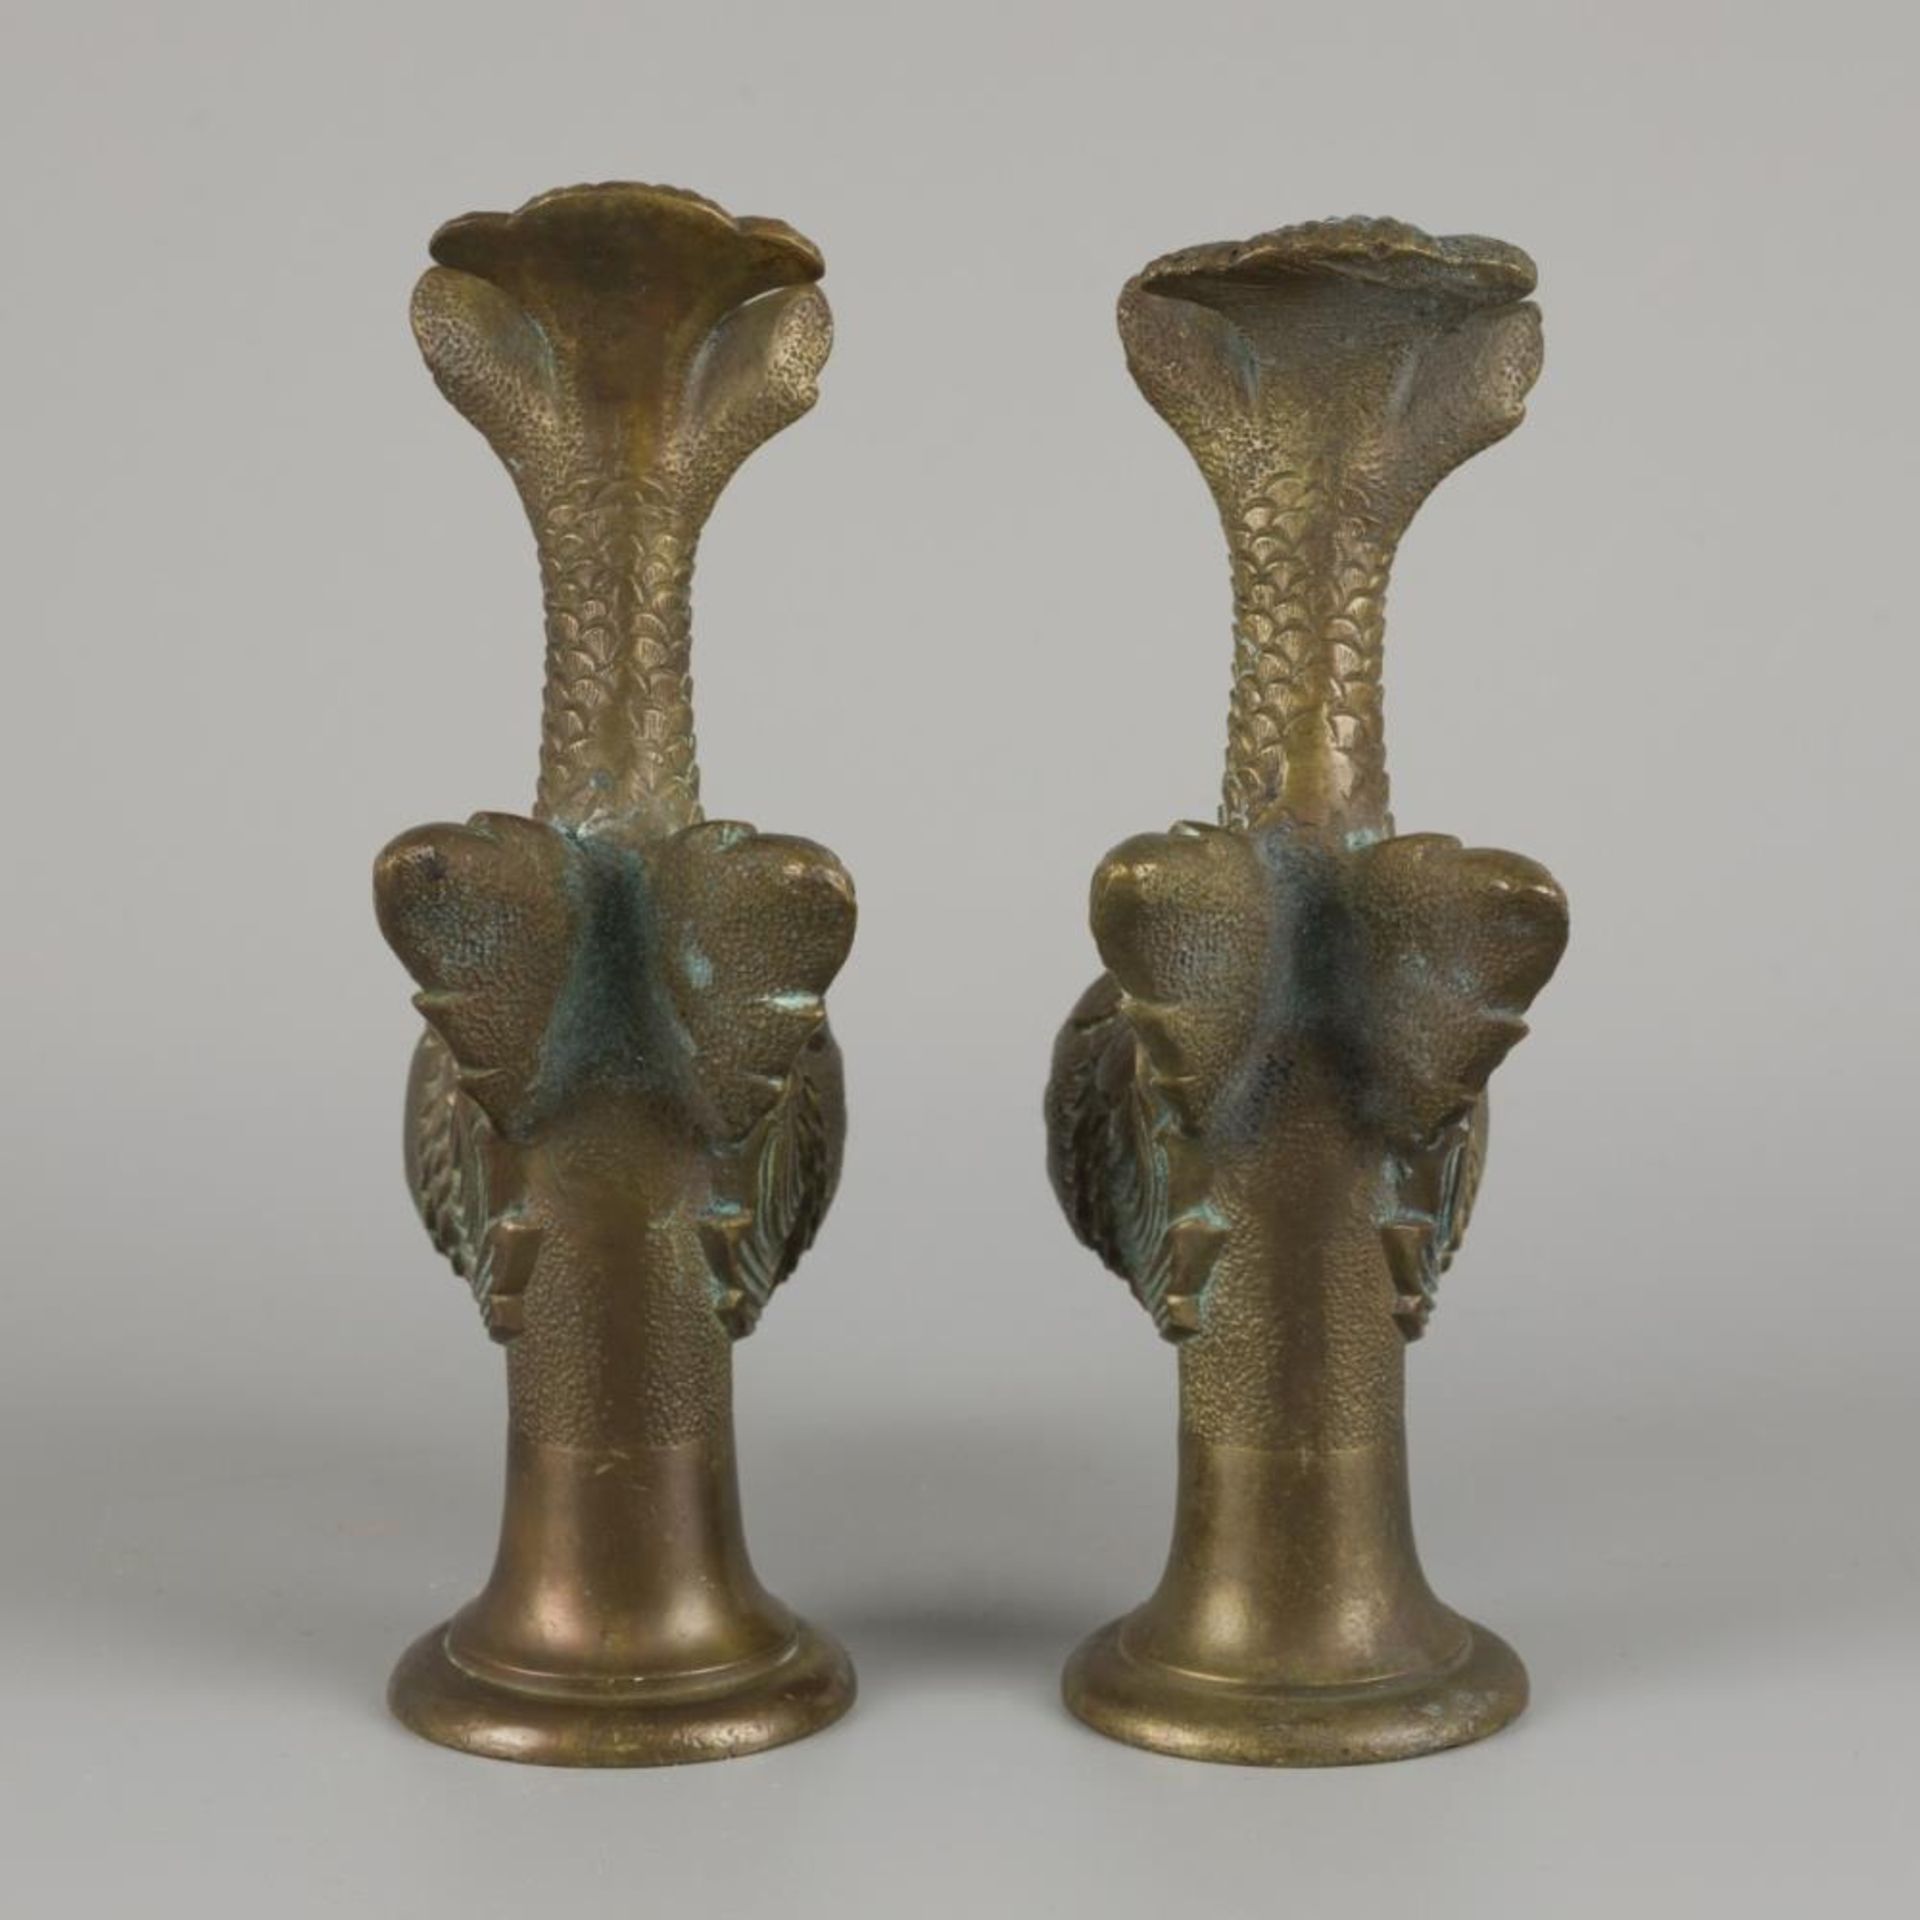 A set of (2) bronze water faucets in the shape of fish, France, ca. 1900. - Image 3 of 3